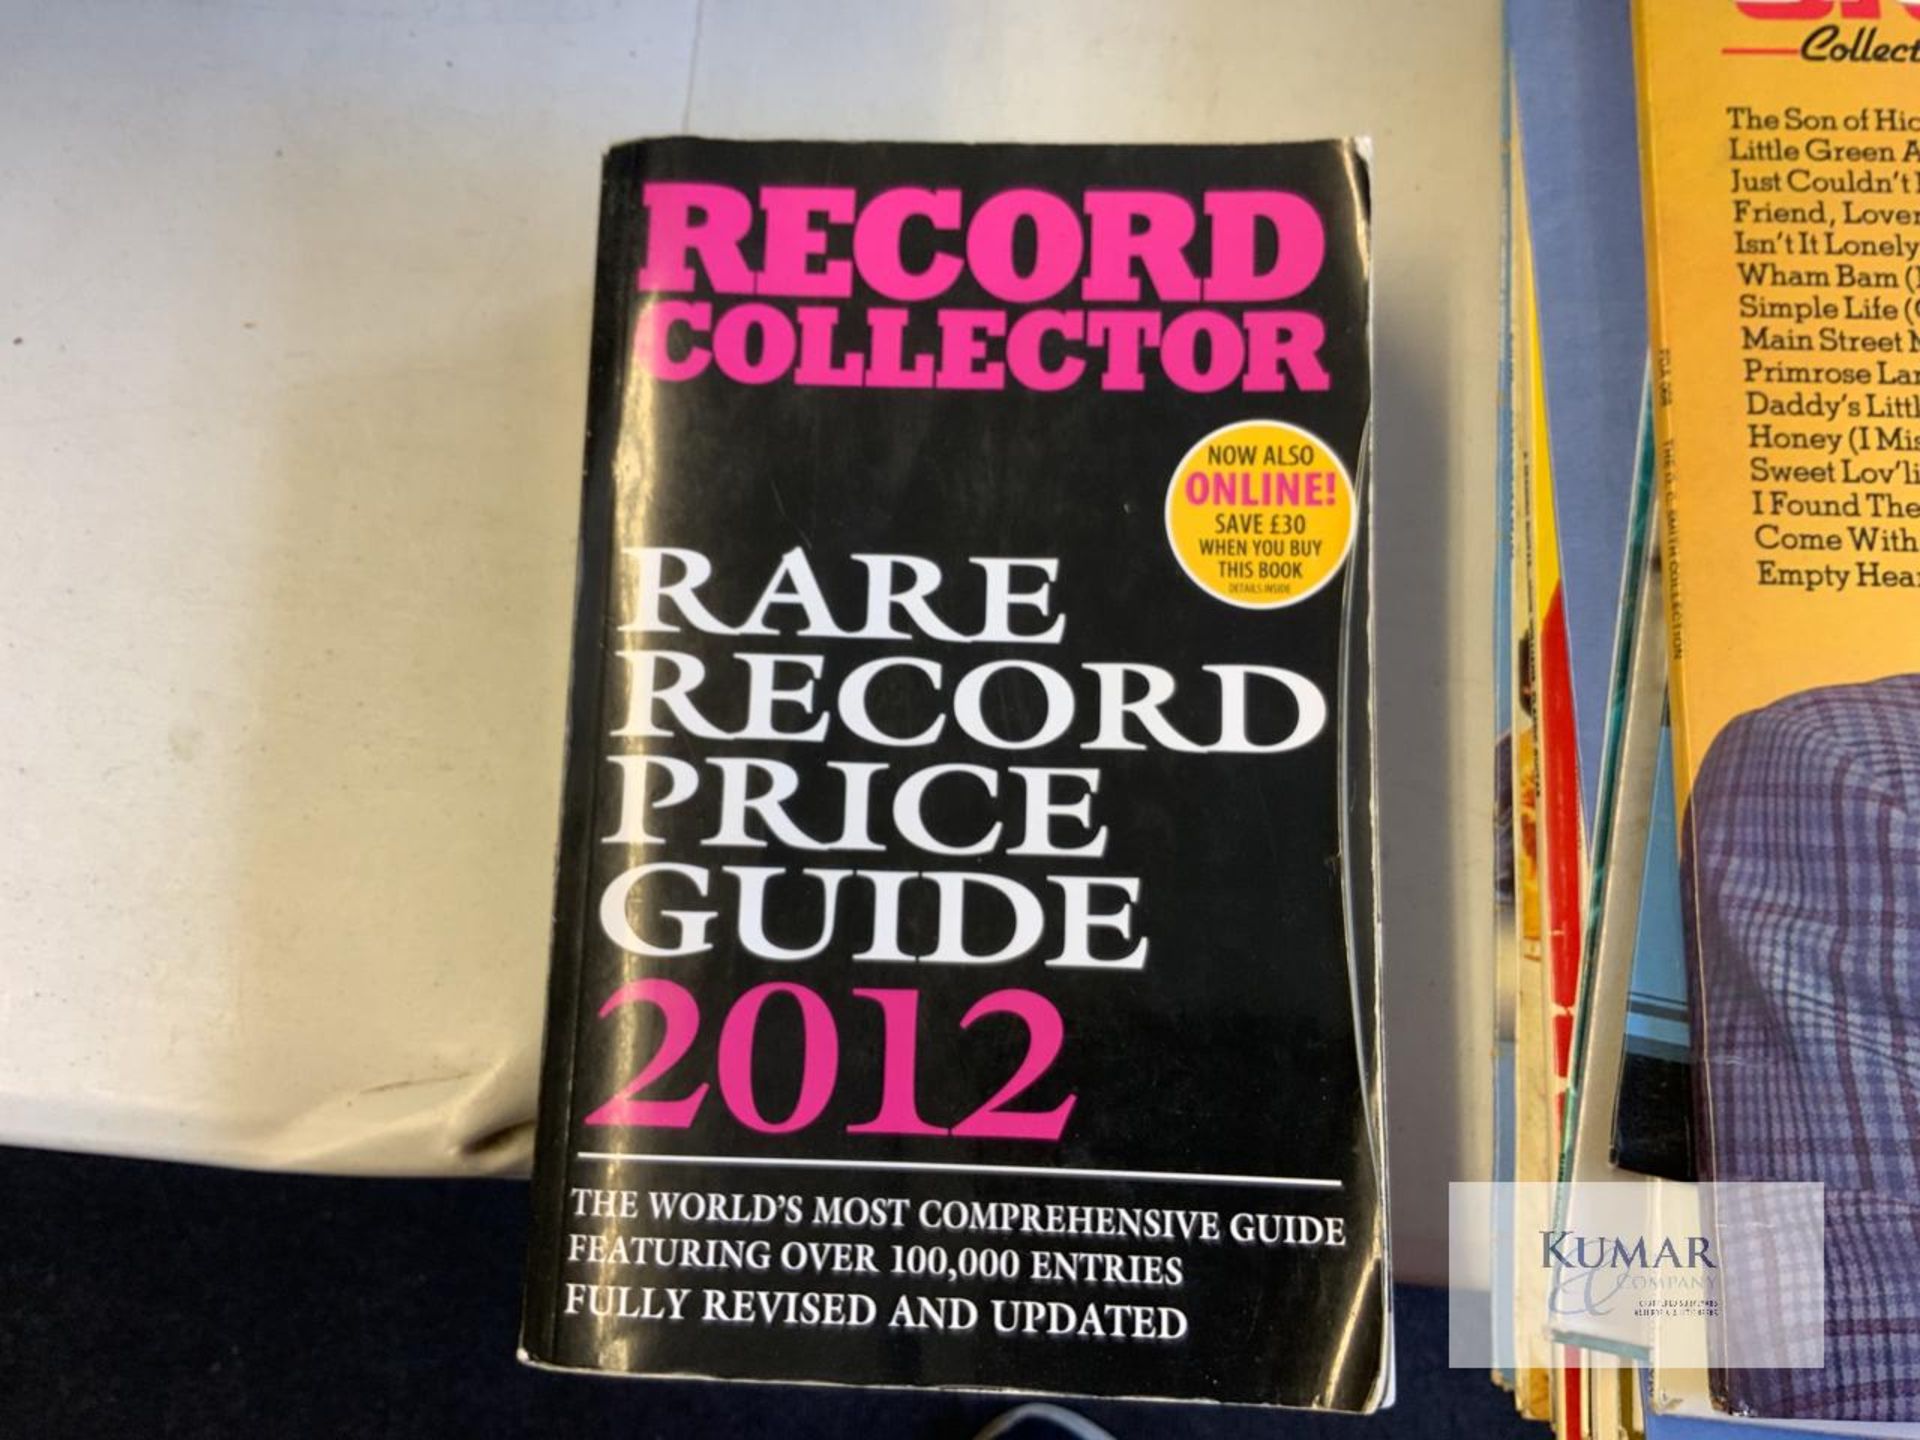 Large Collection of Vintage And Aged Vinyl Records, Books, Literature As Shown - Image 7 of 18